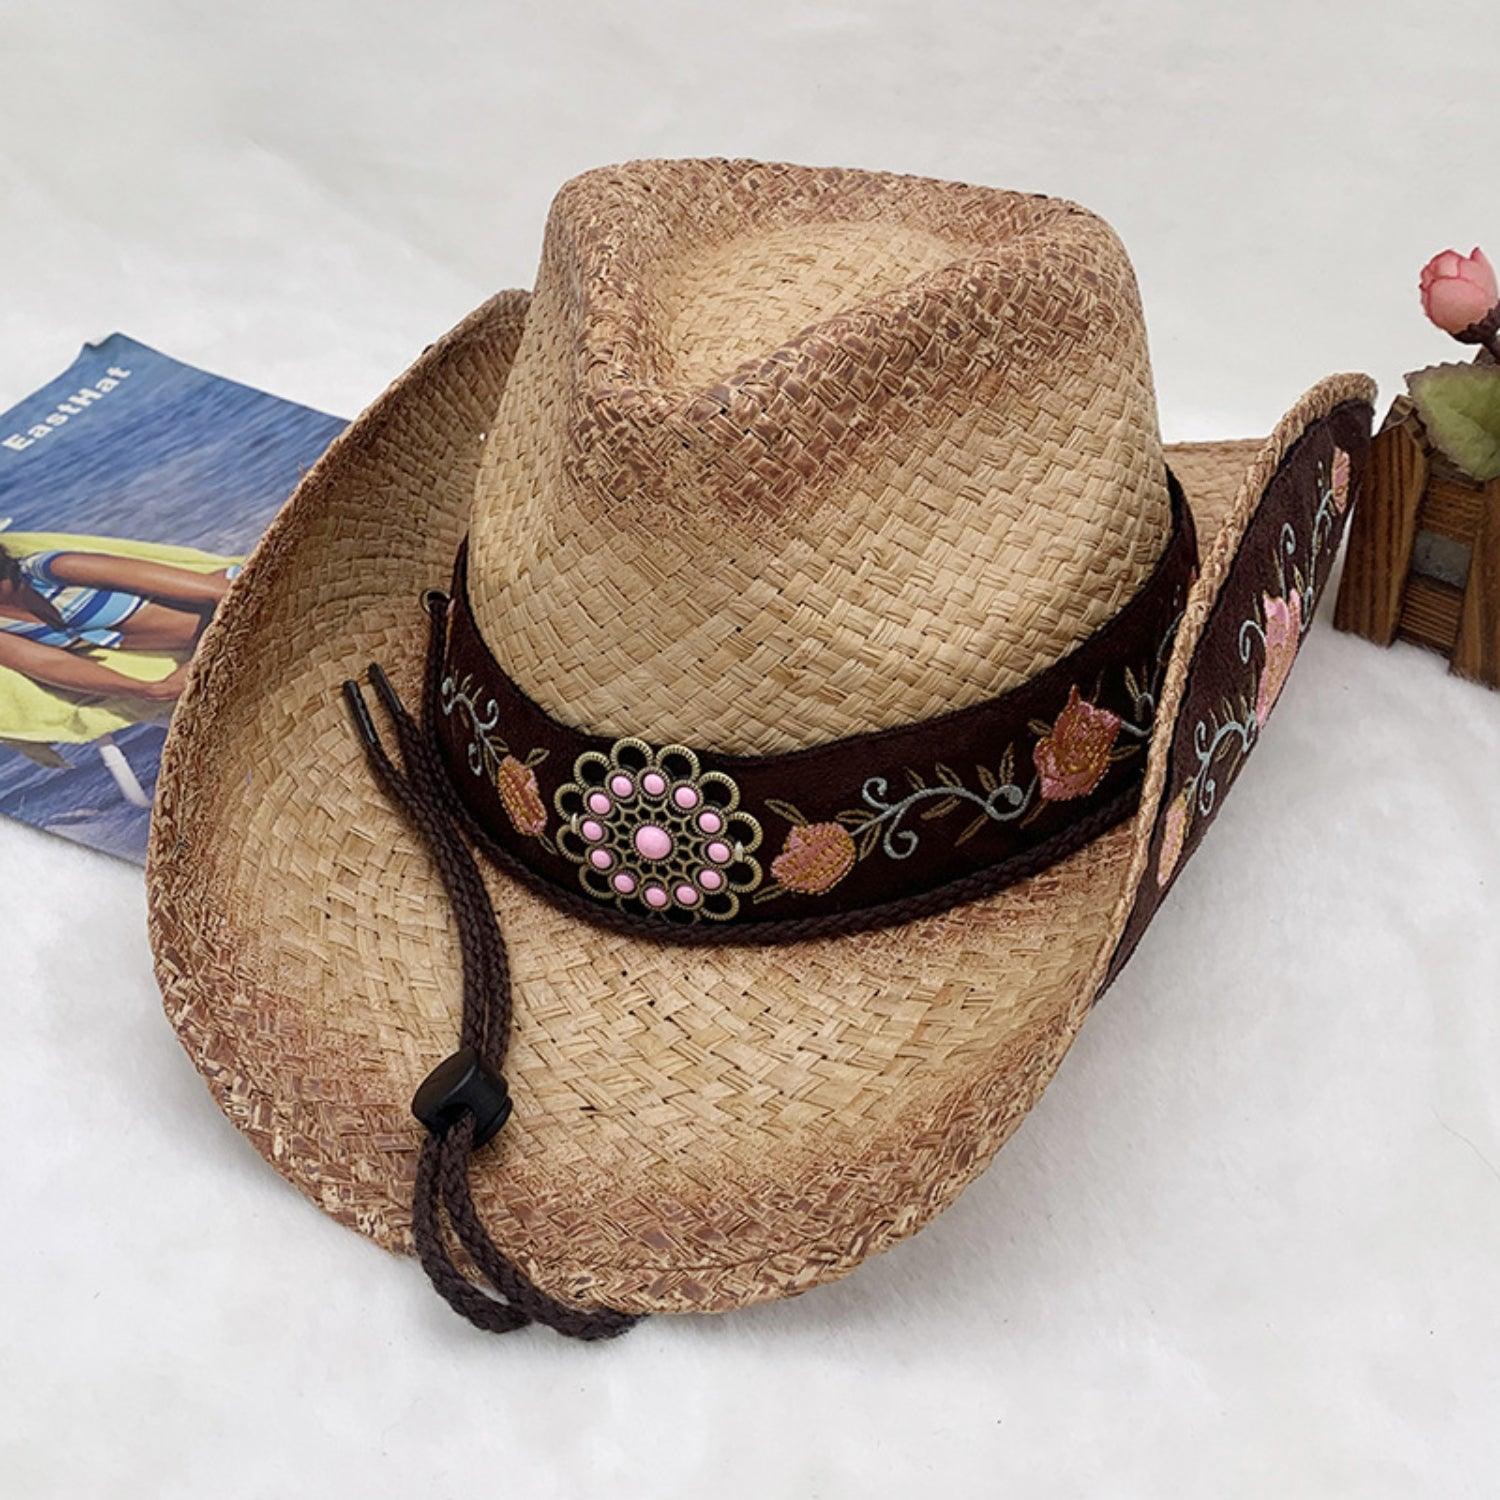 a cowboy hat with a cowgirl figure on top of it